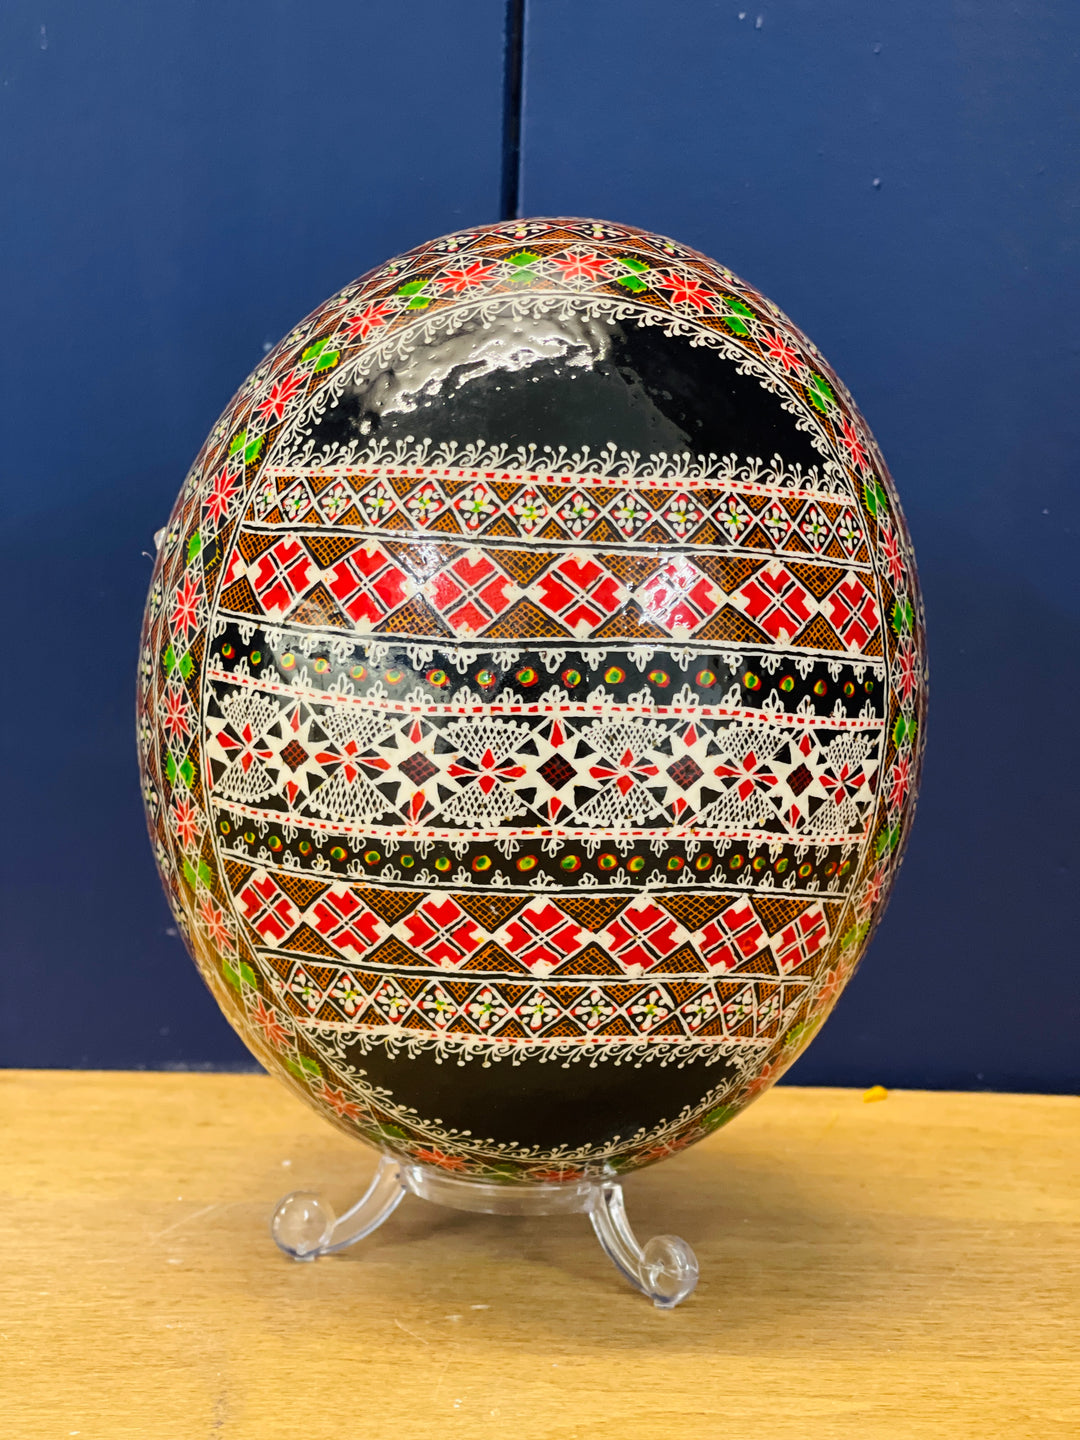 "Encompassing all the meanings and wishes of a Pysanka" by Eugenia Richardson